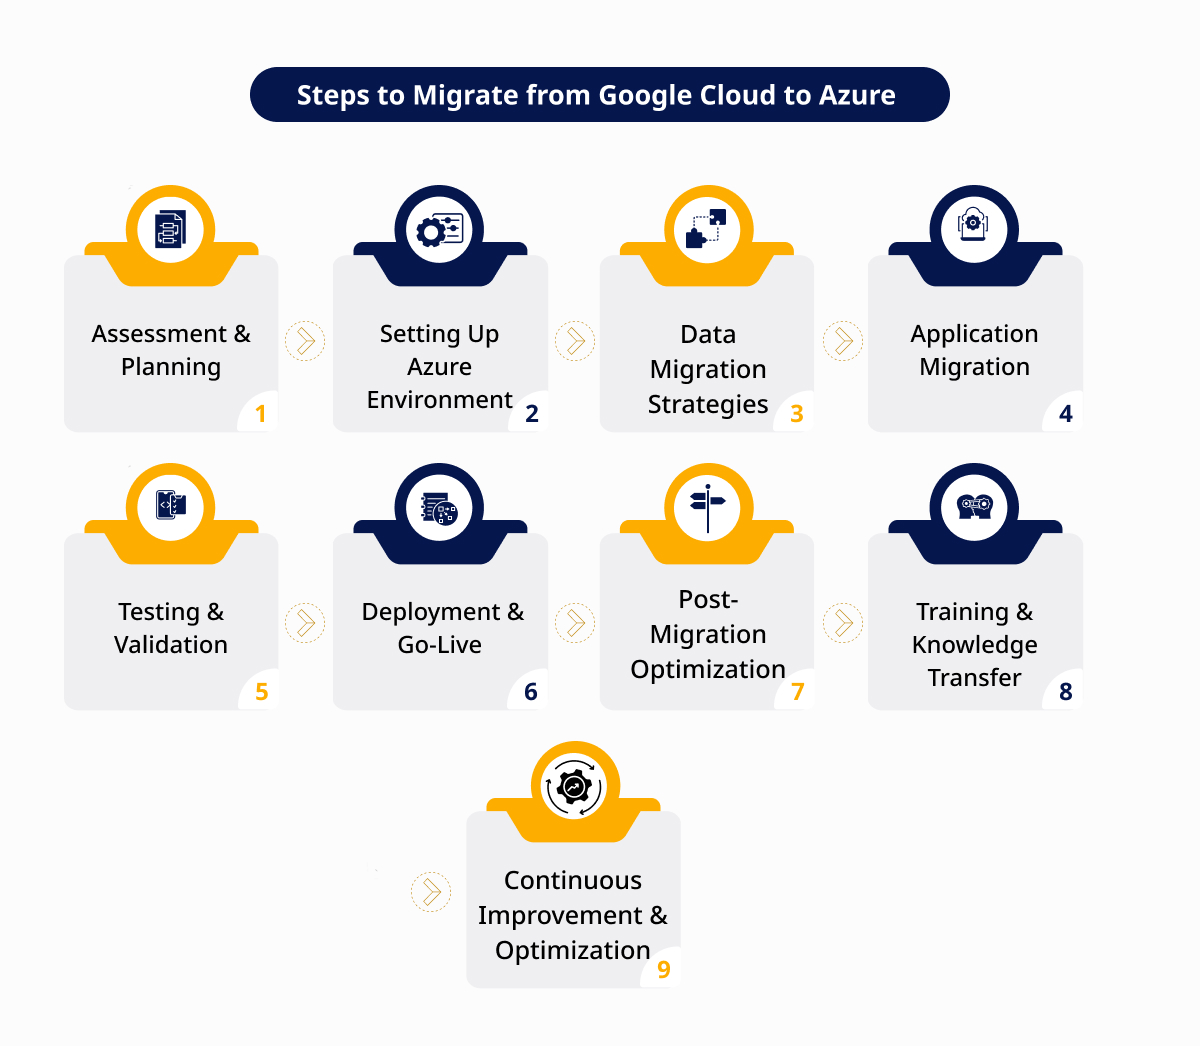 Steps to Migrate from Google Cloud to Azure